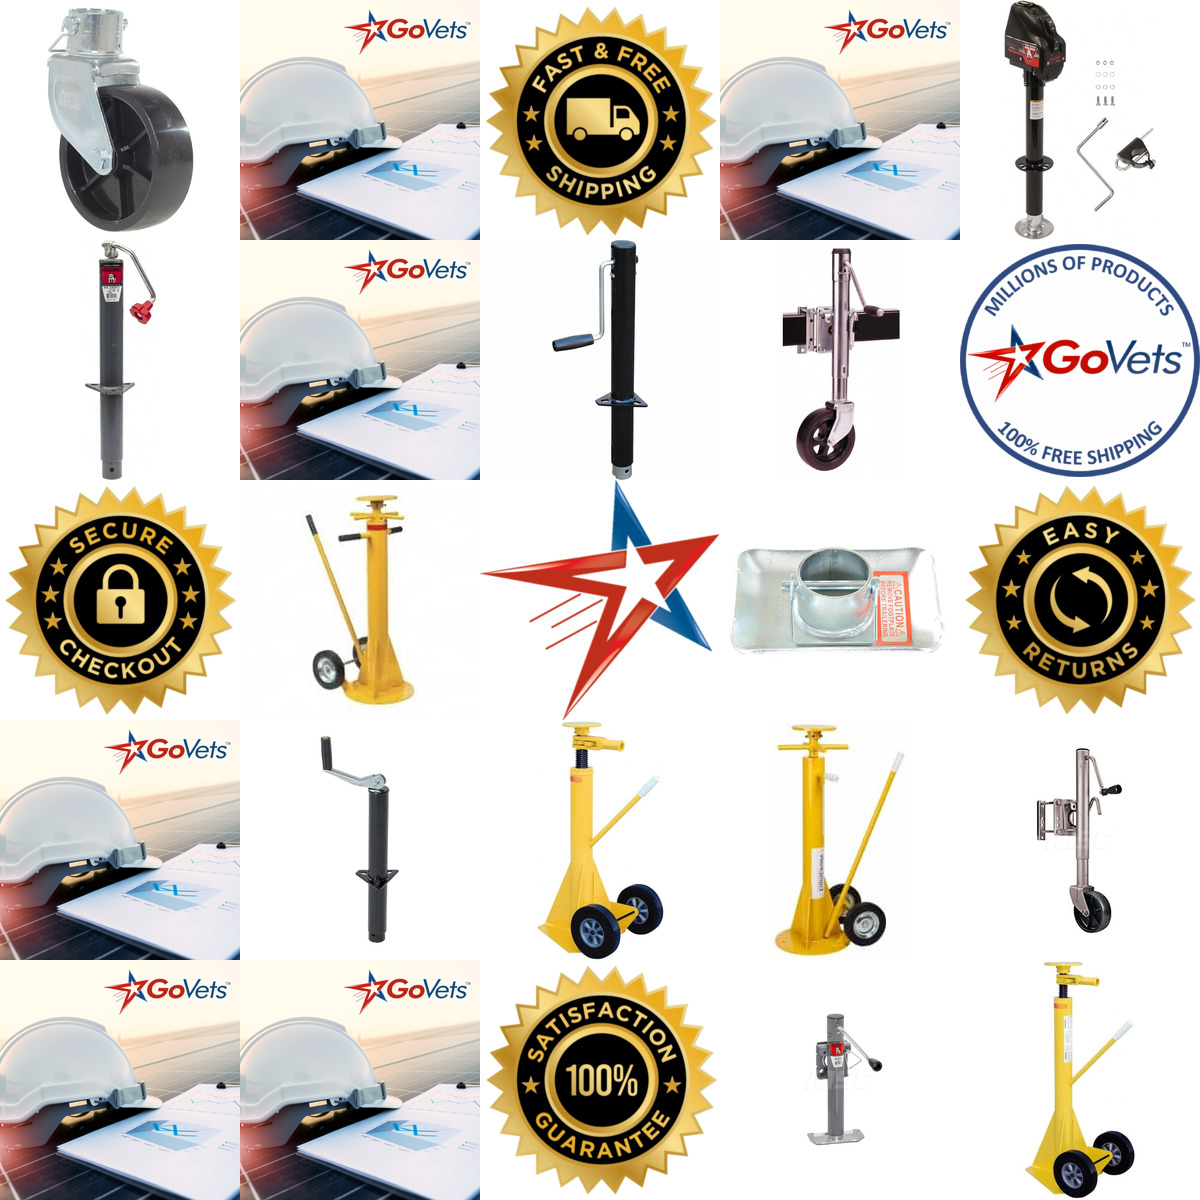 A selection of Trailer Jacks and Accessories products on GoVets